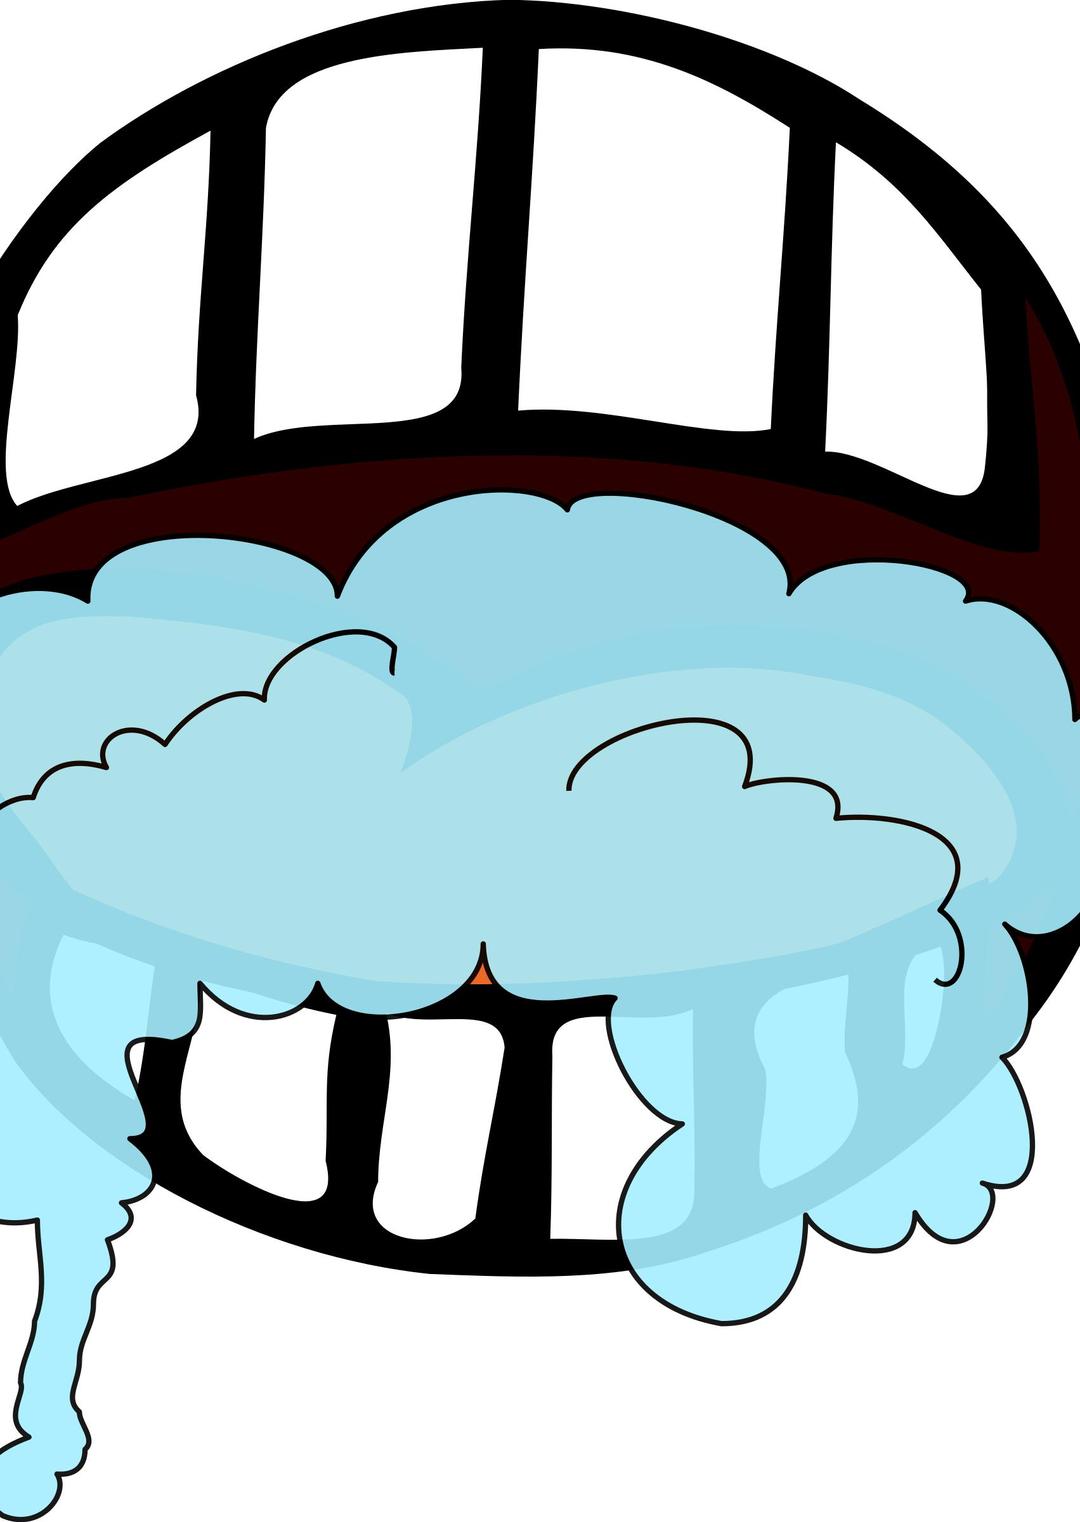 Mouth Foaming 2 png transparent